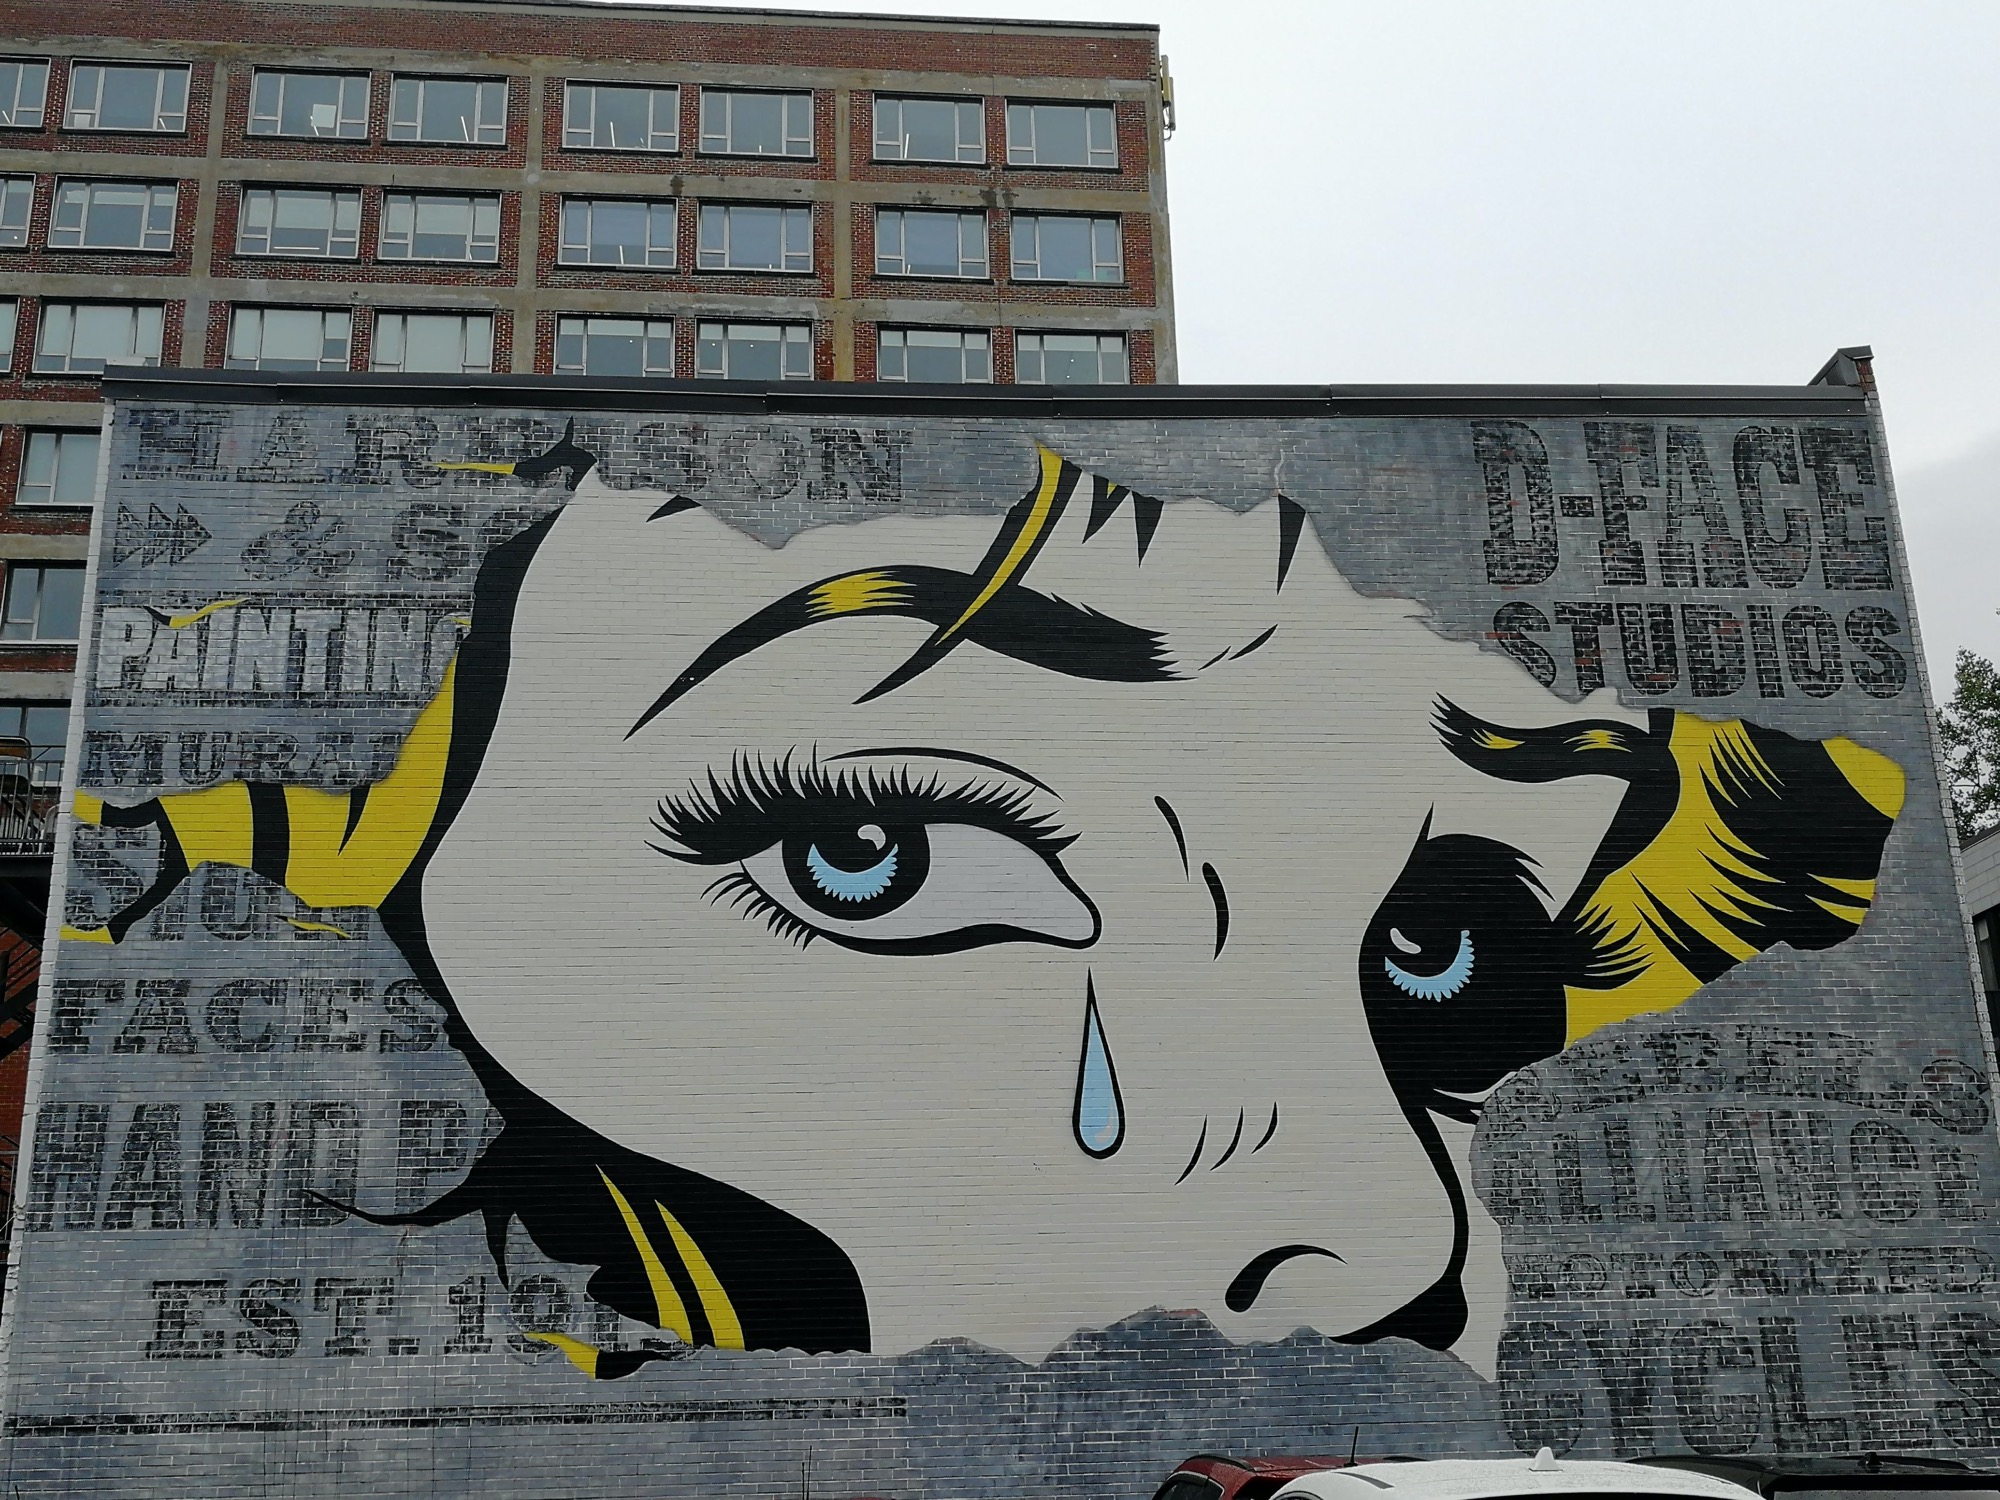 Graffiti 2920  by the artist DFace captured by Rabot in Montréal Canada